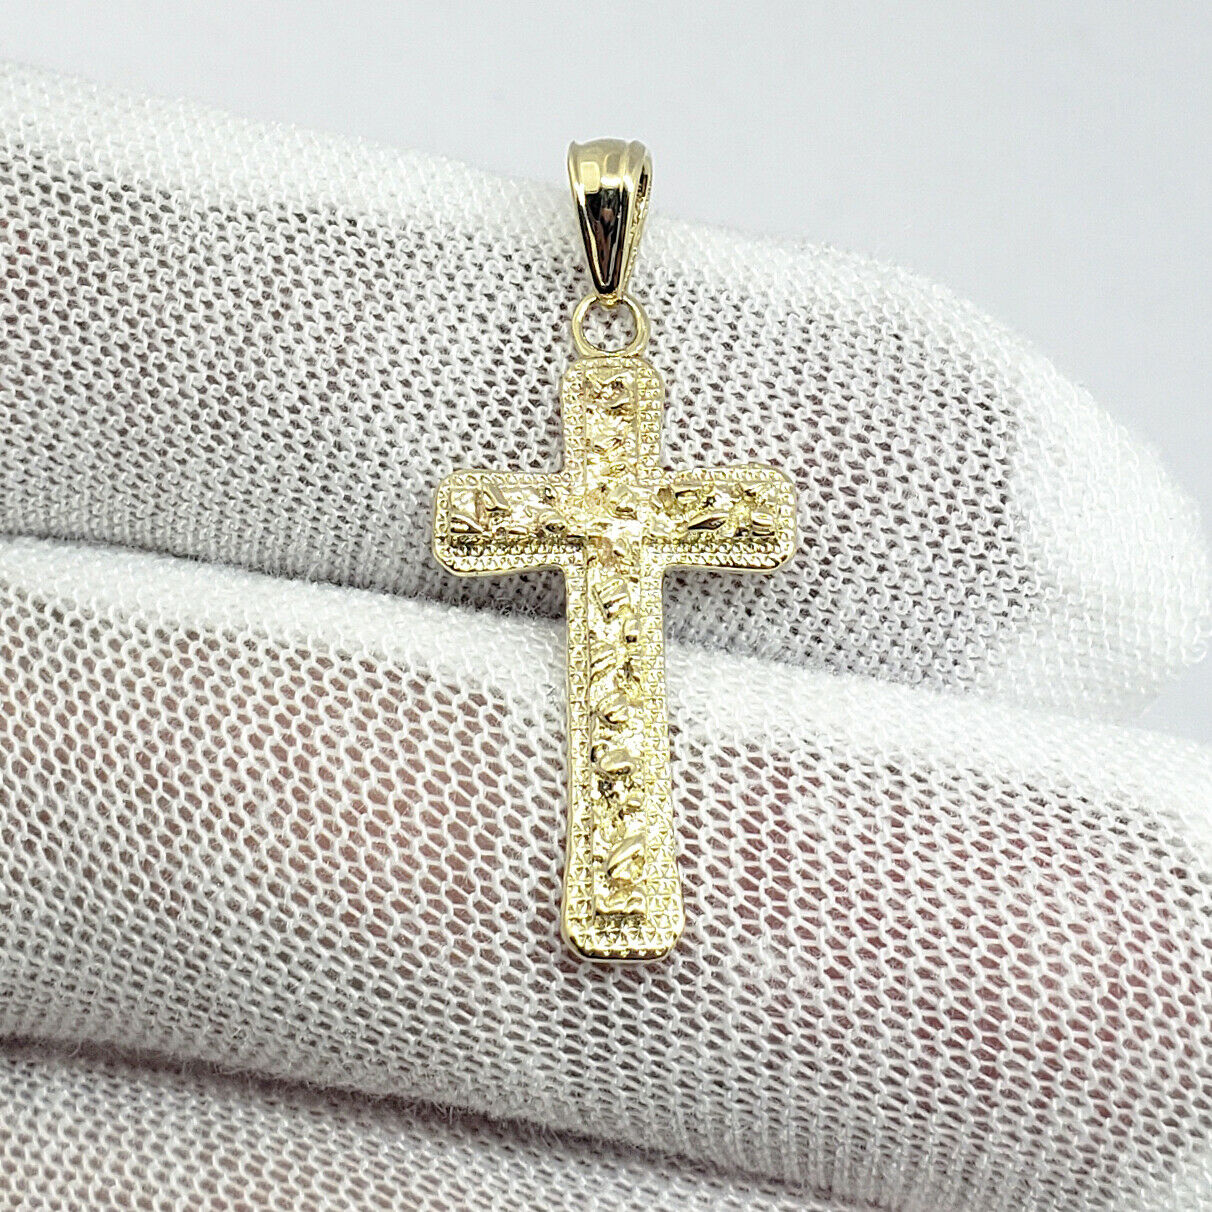 New Mens or Ladies Mini Solid 10K Yellow Gold Cross Pendant Charm 1.6 Inches 